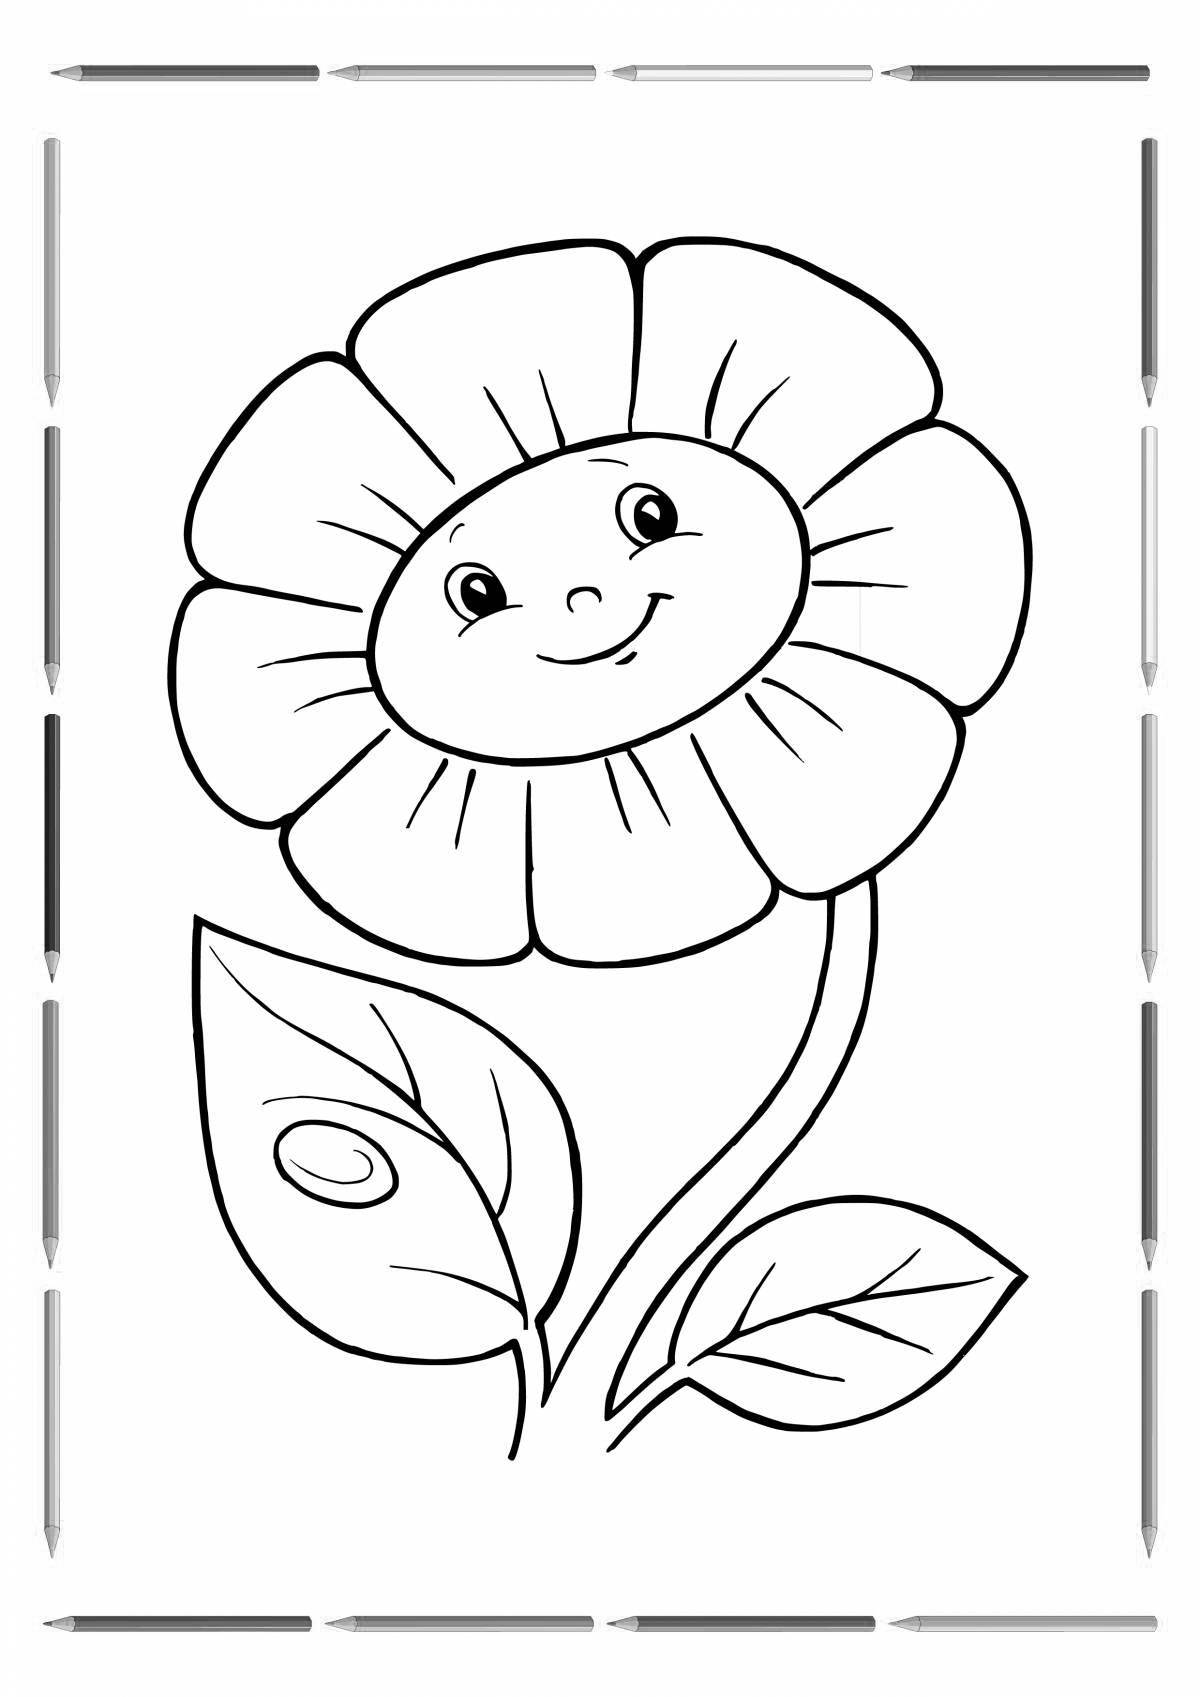 Exciting flower pattern for kids